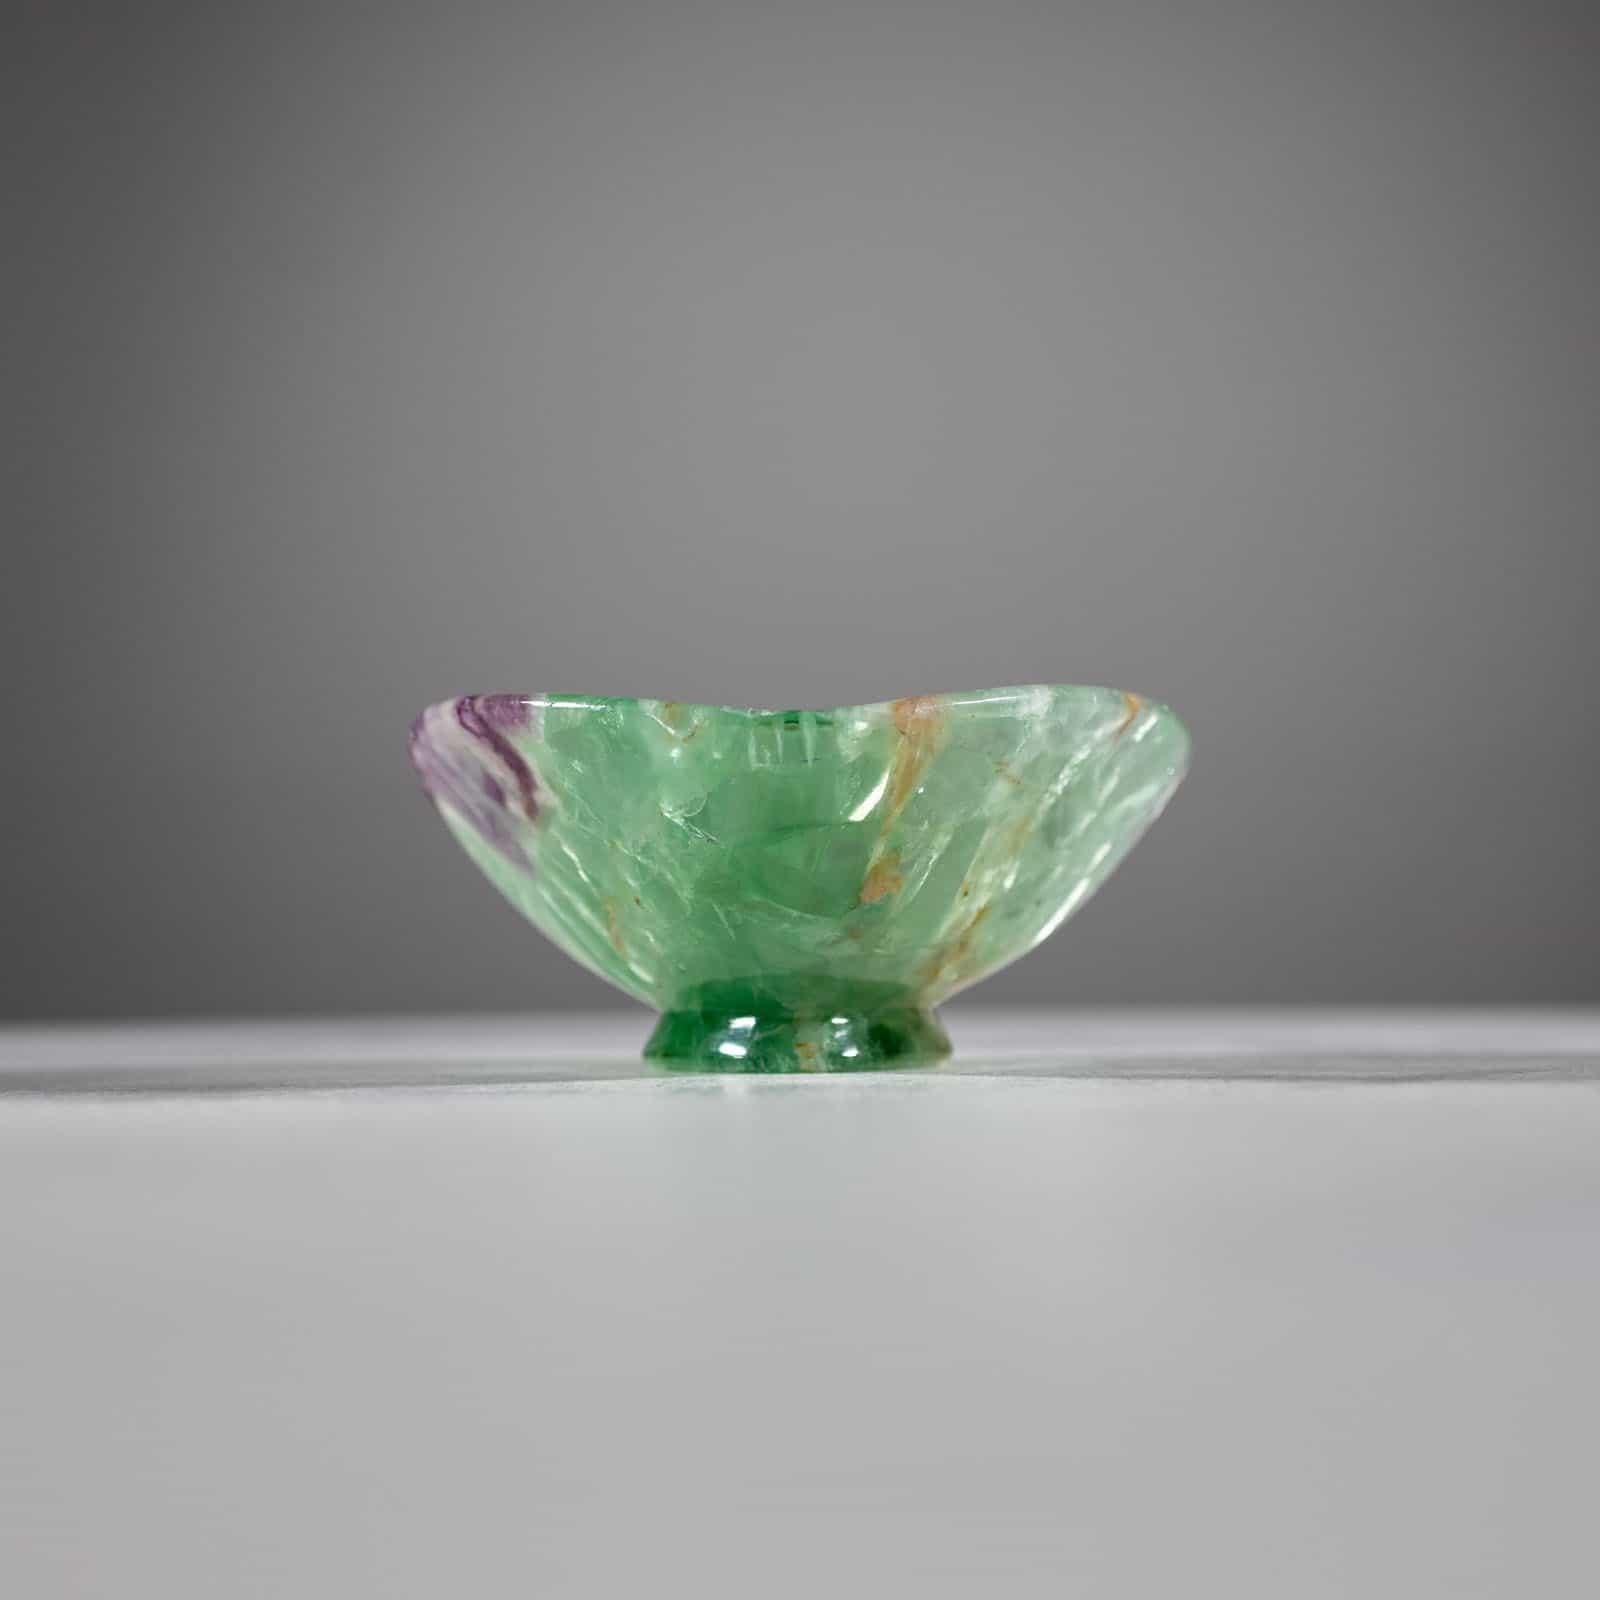 Small Bowl made of cut Gemstone by Helmut Wolf, 1960s/70s For Sale 1